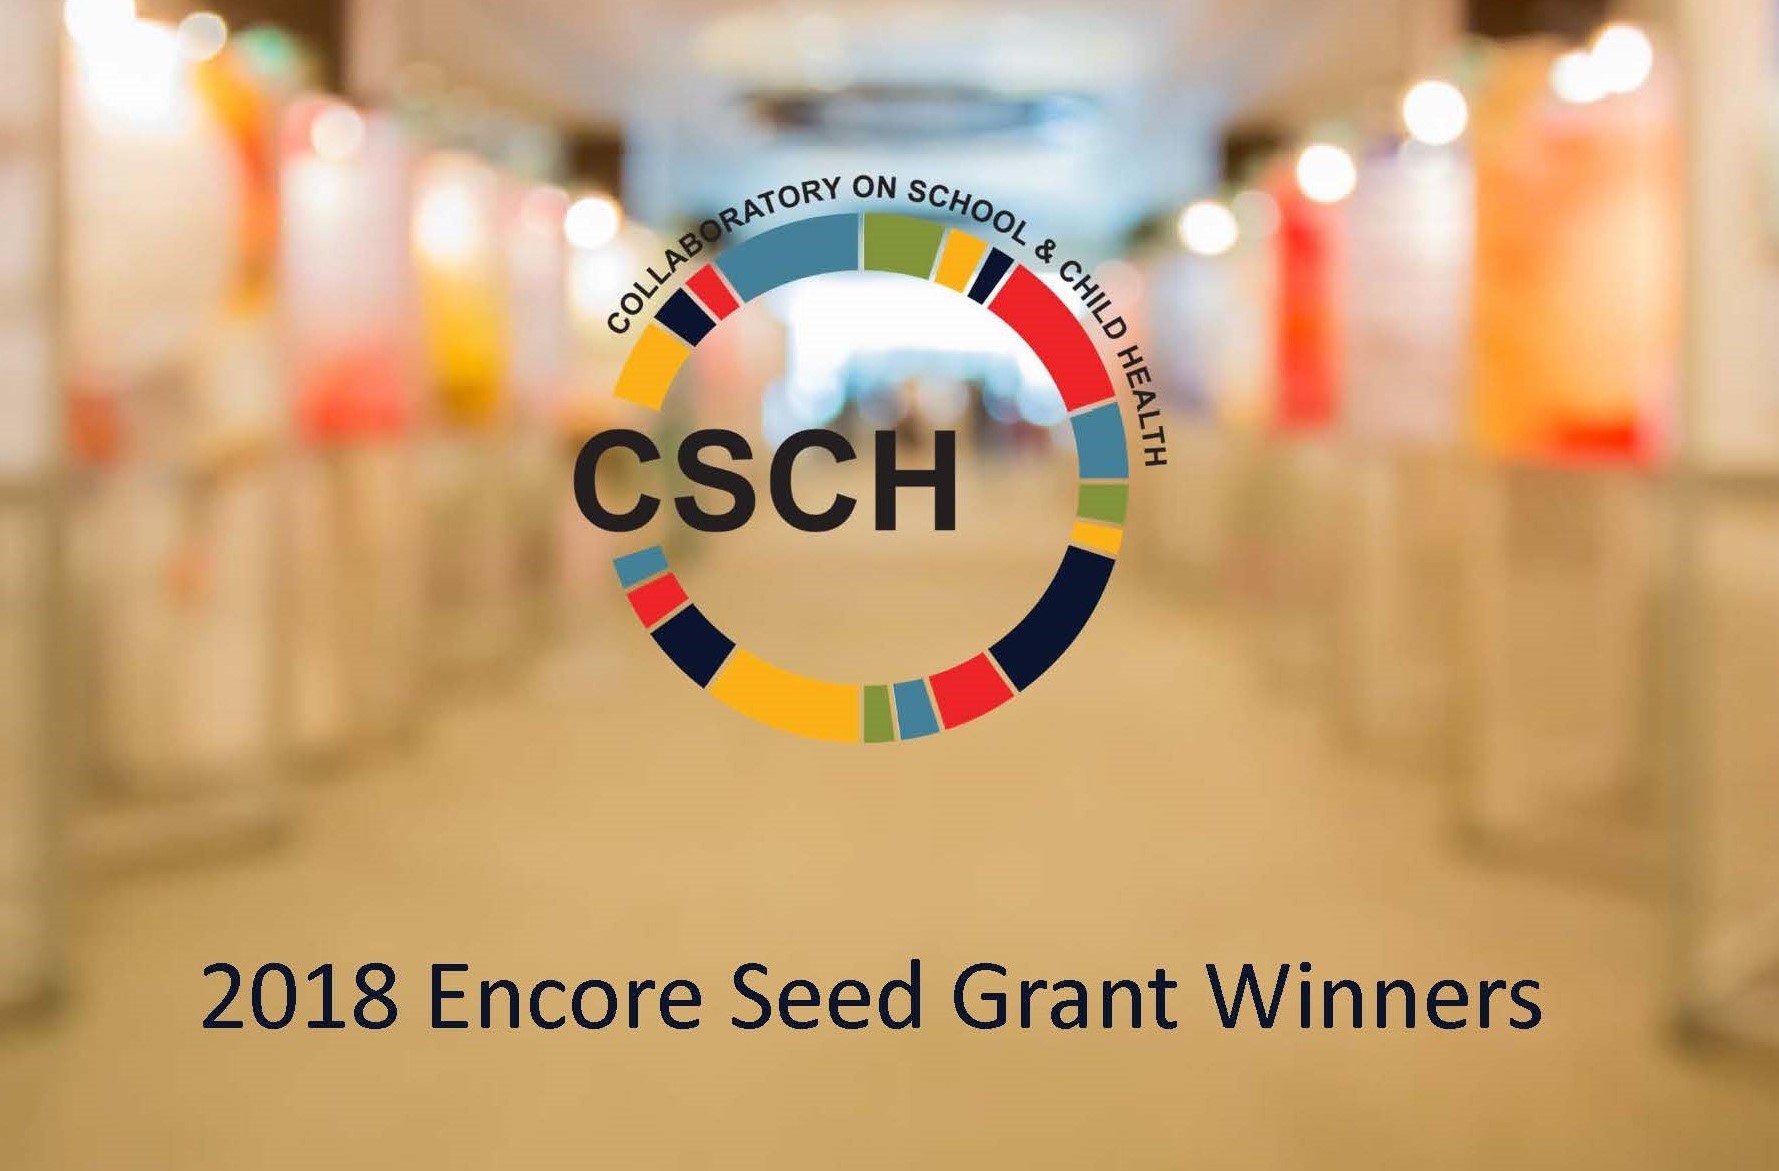 CSCH Logo and Text: 2018 Encore Seed Grant Winners